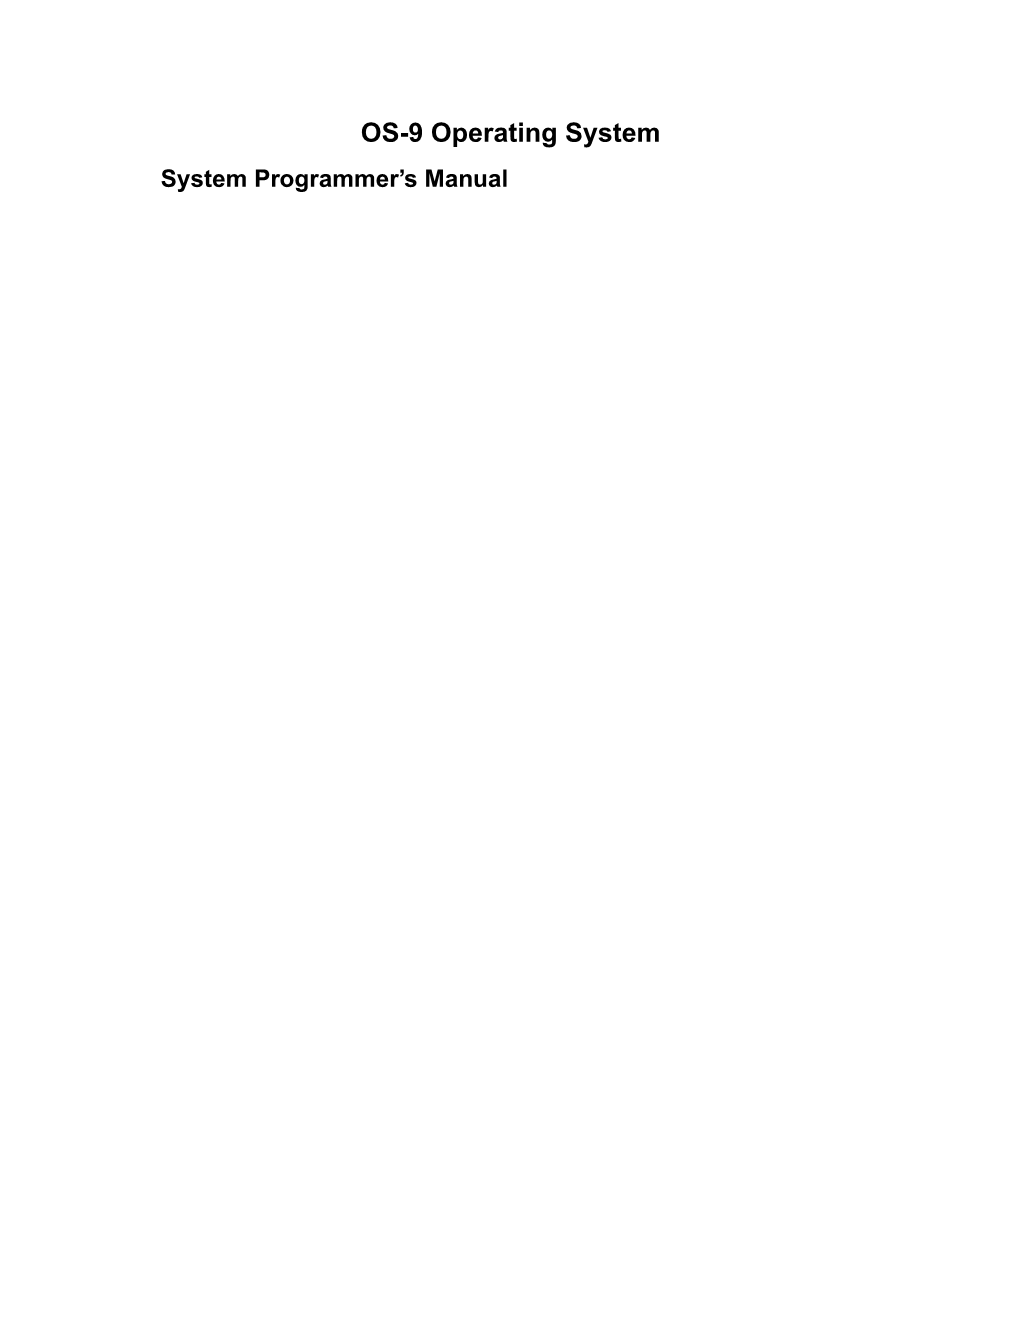 OS-9 Operating System System Programmer’S Manual OS-9 Operating System: System Programmer’S Manual Copyright © 1980, 1982 by Microware Systems Corporation